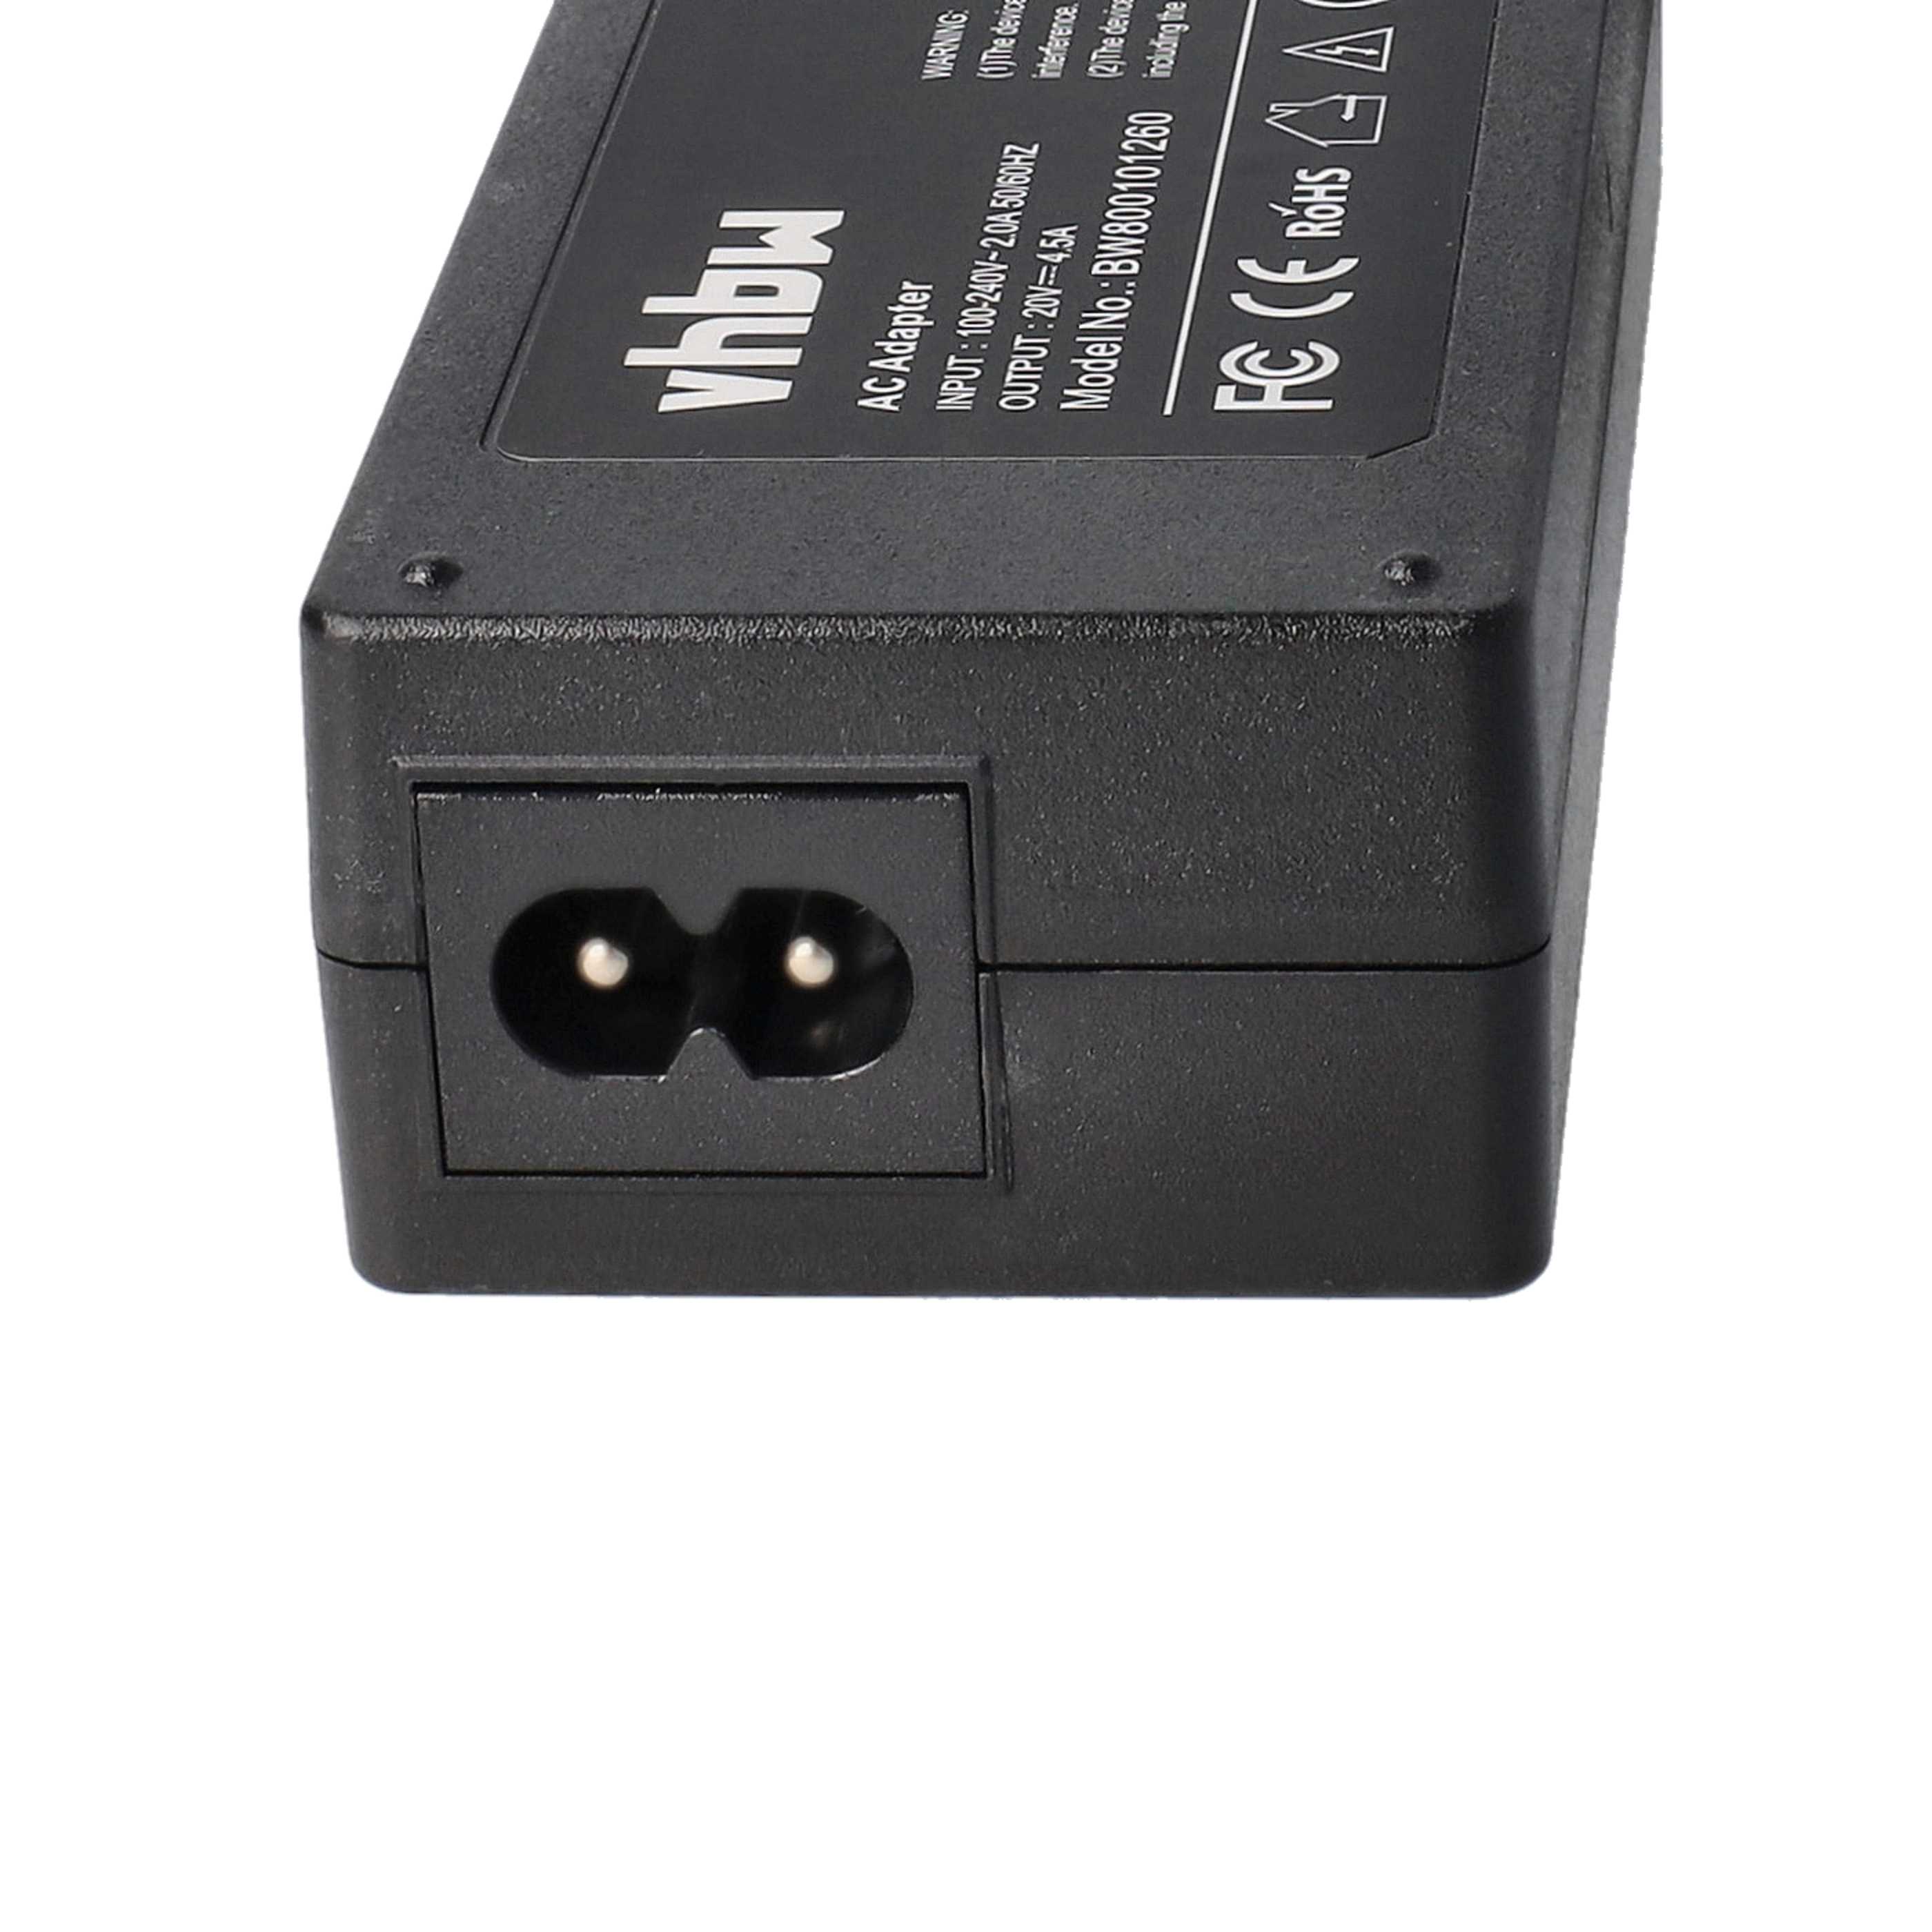 Mains Power Adapter replaces Lenovo 41N8460, 40Y7700, 92P1153, 92P1104, 40Y7696 for IBMNotebook etc., 90 W